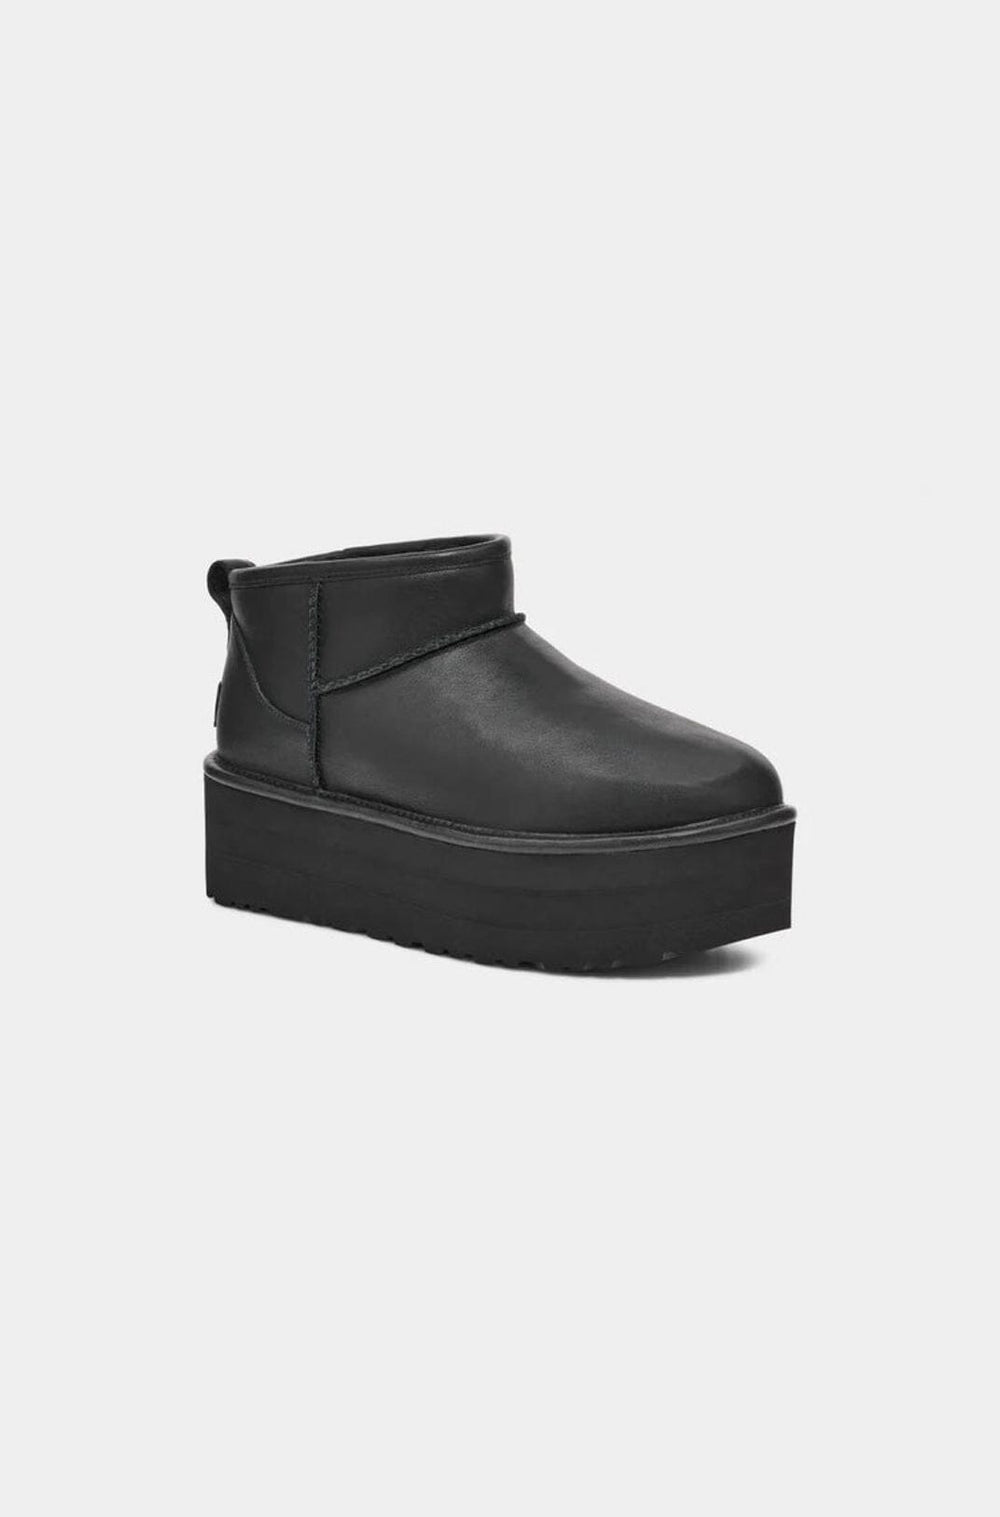 CLASSIC ULTRA MINI PLATFORM IN LEATHER SHOES UGG 